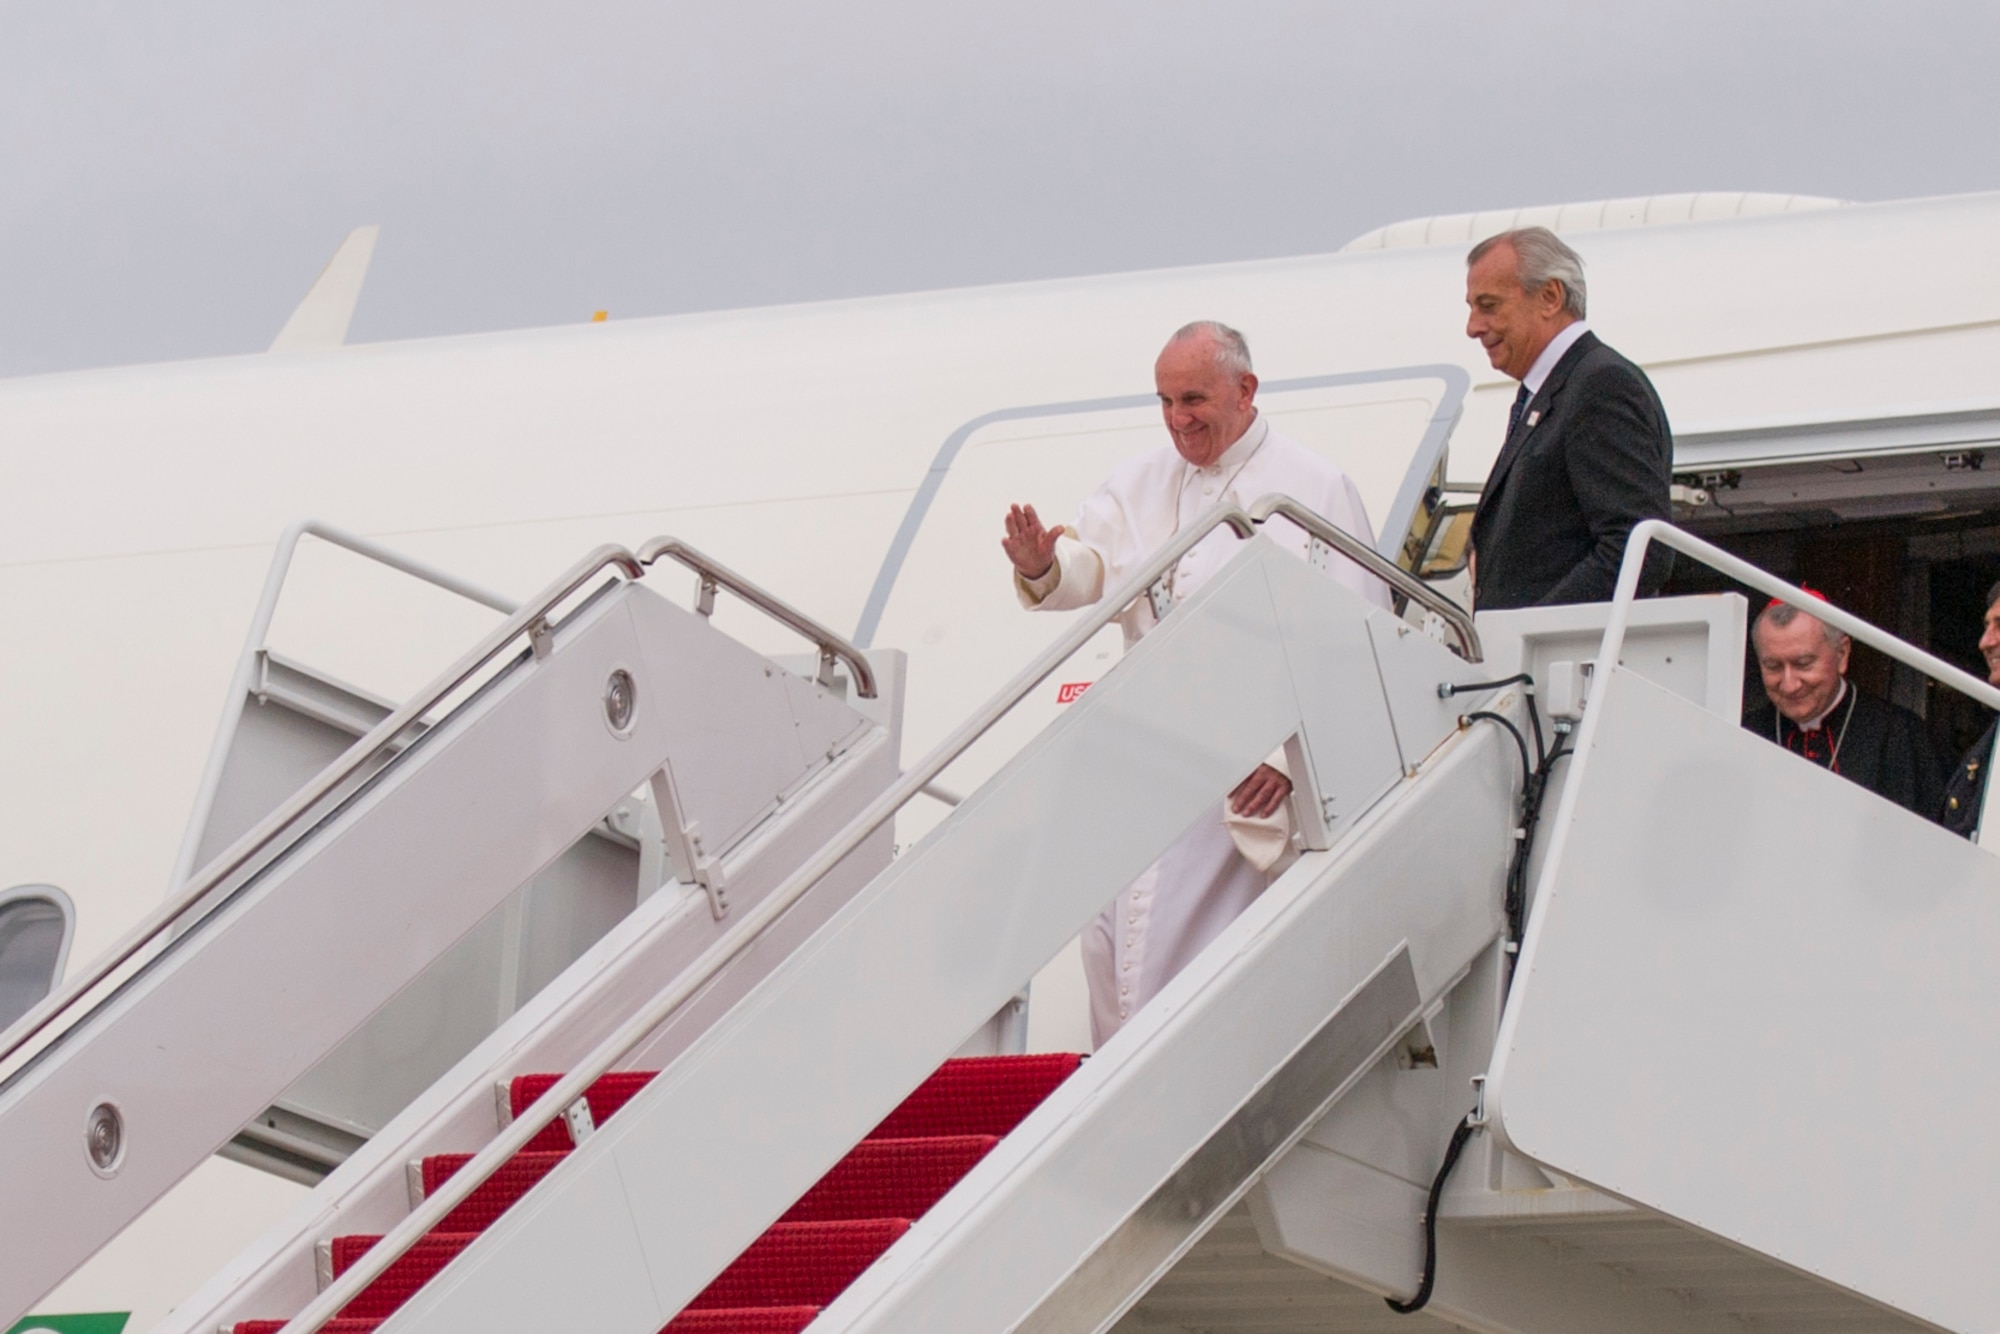 Pope Francis waves to the crowd at Joint Base Andrews, Md., Sept. 22, 2015 after a departing Cuba earlier that day.  More than one thousand people were in attendance for the pope’s arrival. (U.S. Air Force photo/Tech. Sgt. Robert Cloys)